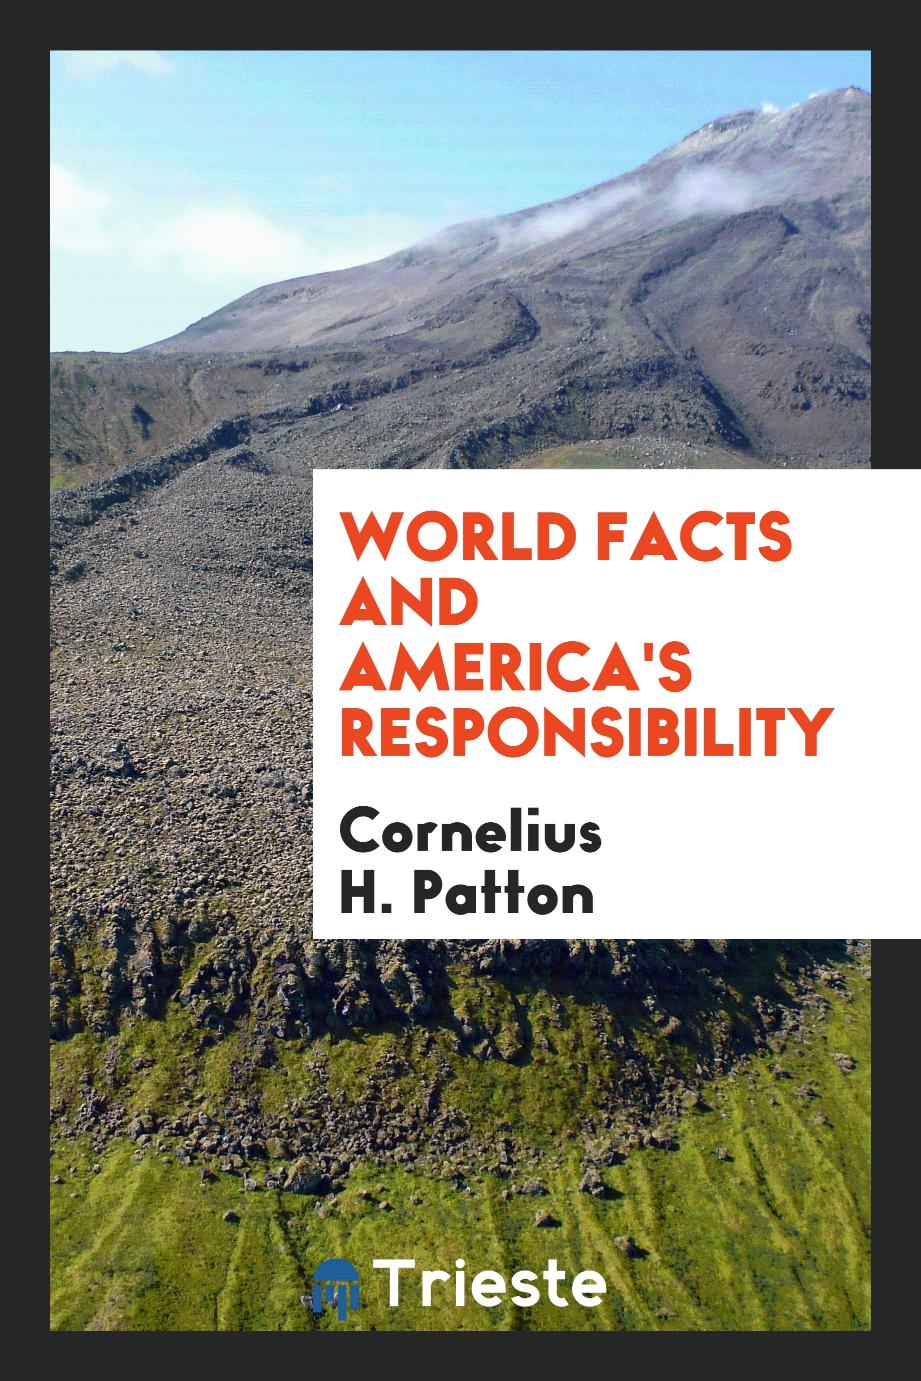 World facts and America's responsibility